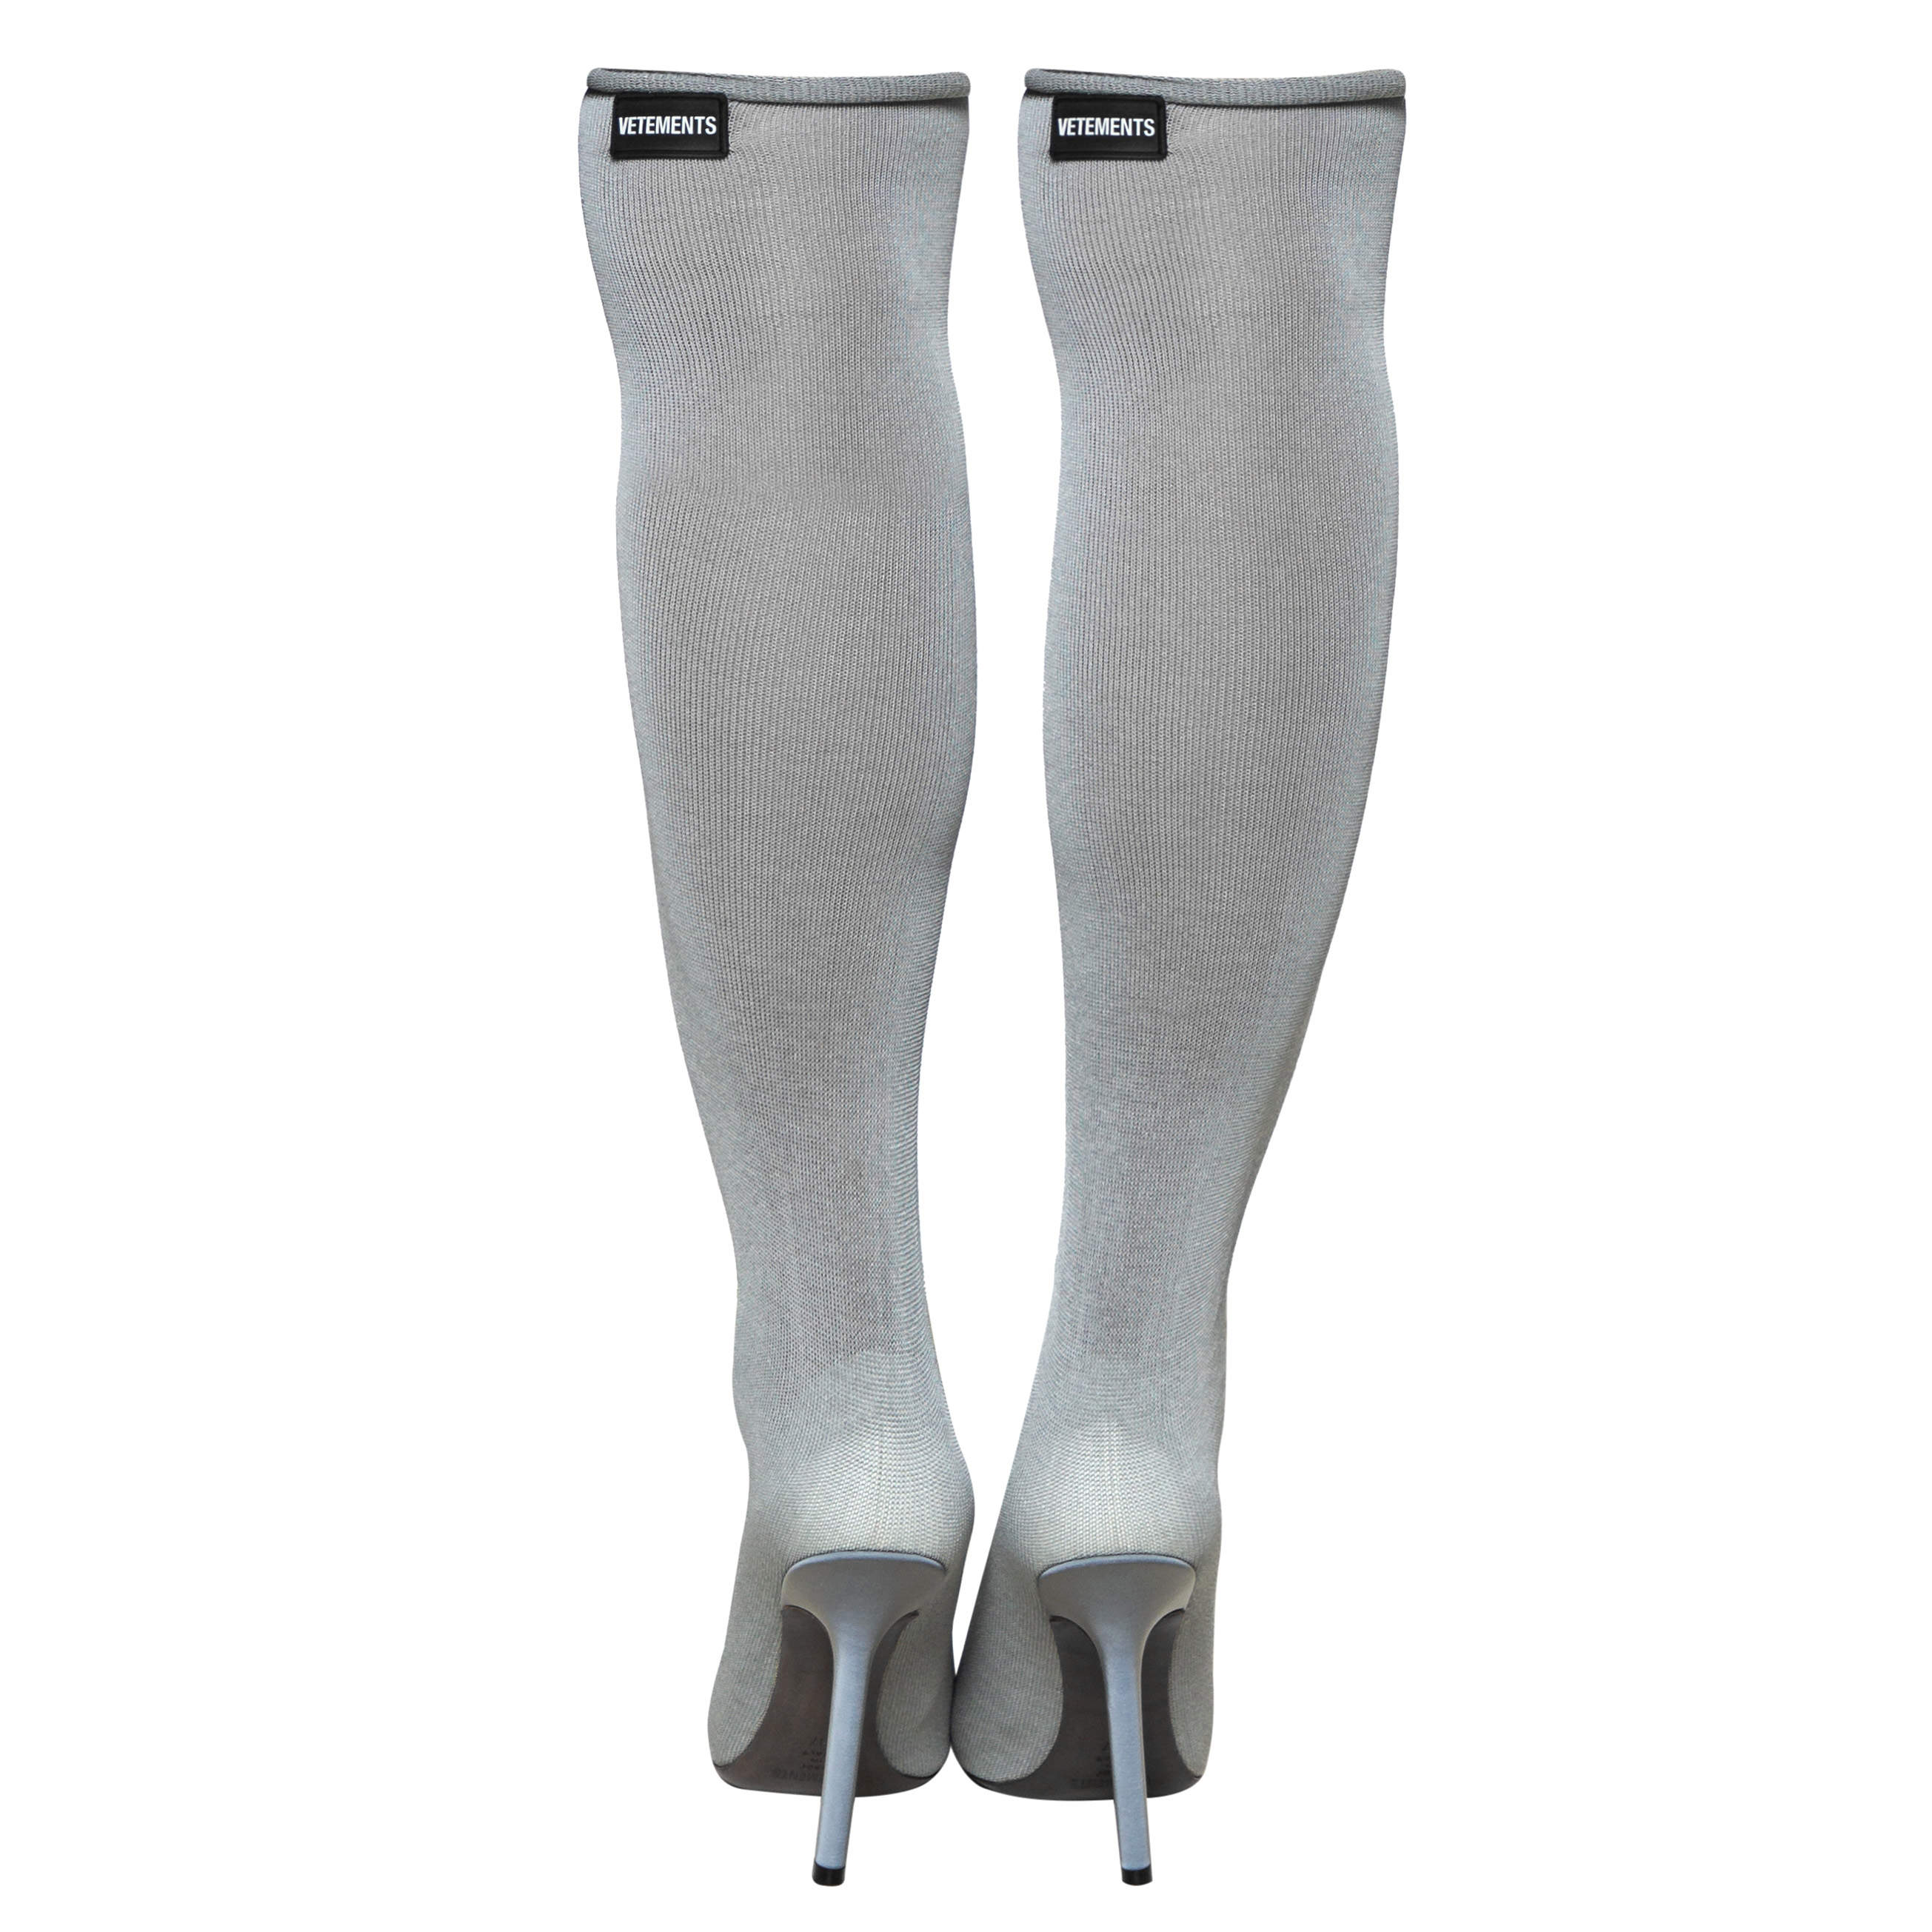 Vetements Grey Stretch Fabric Reflective Thigh High Socks Boots Size 37